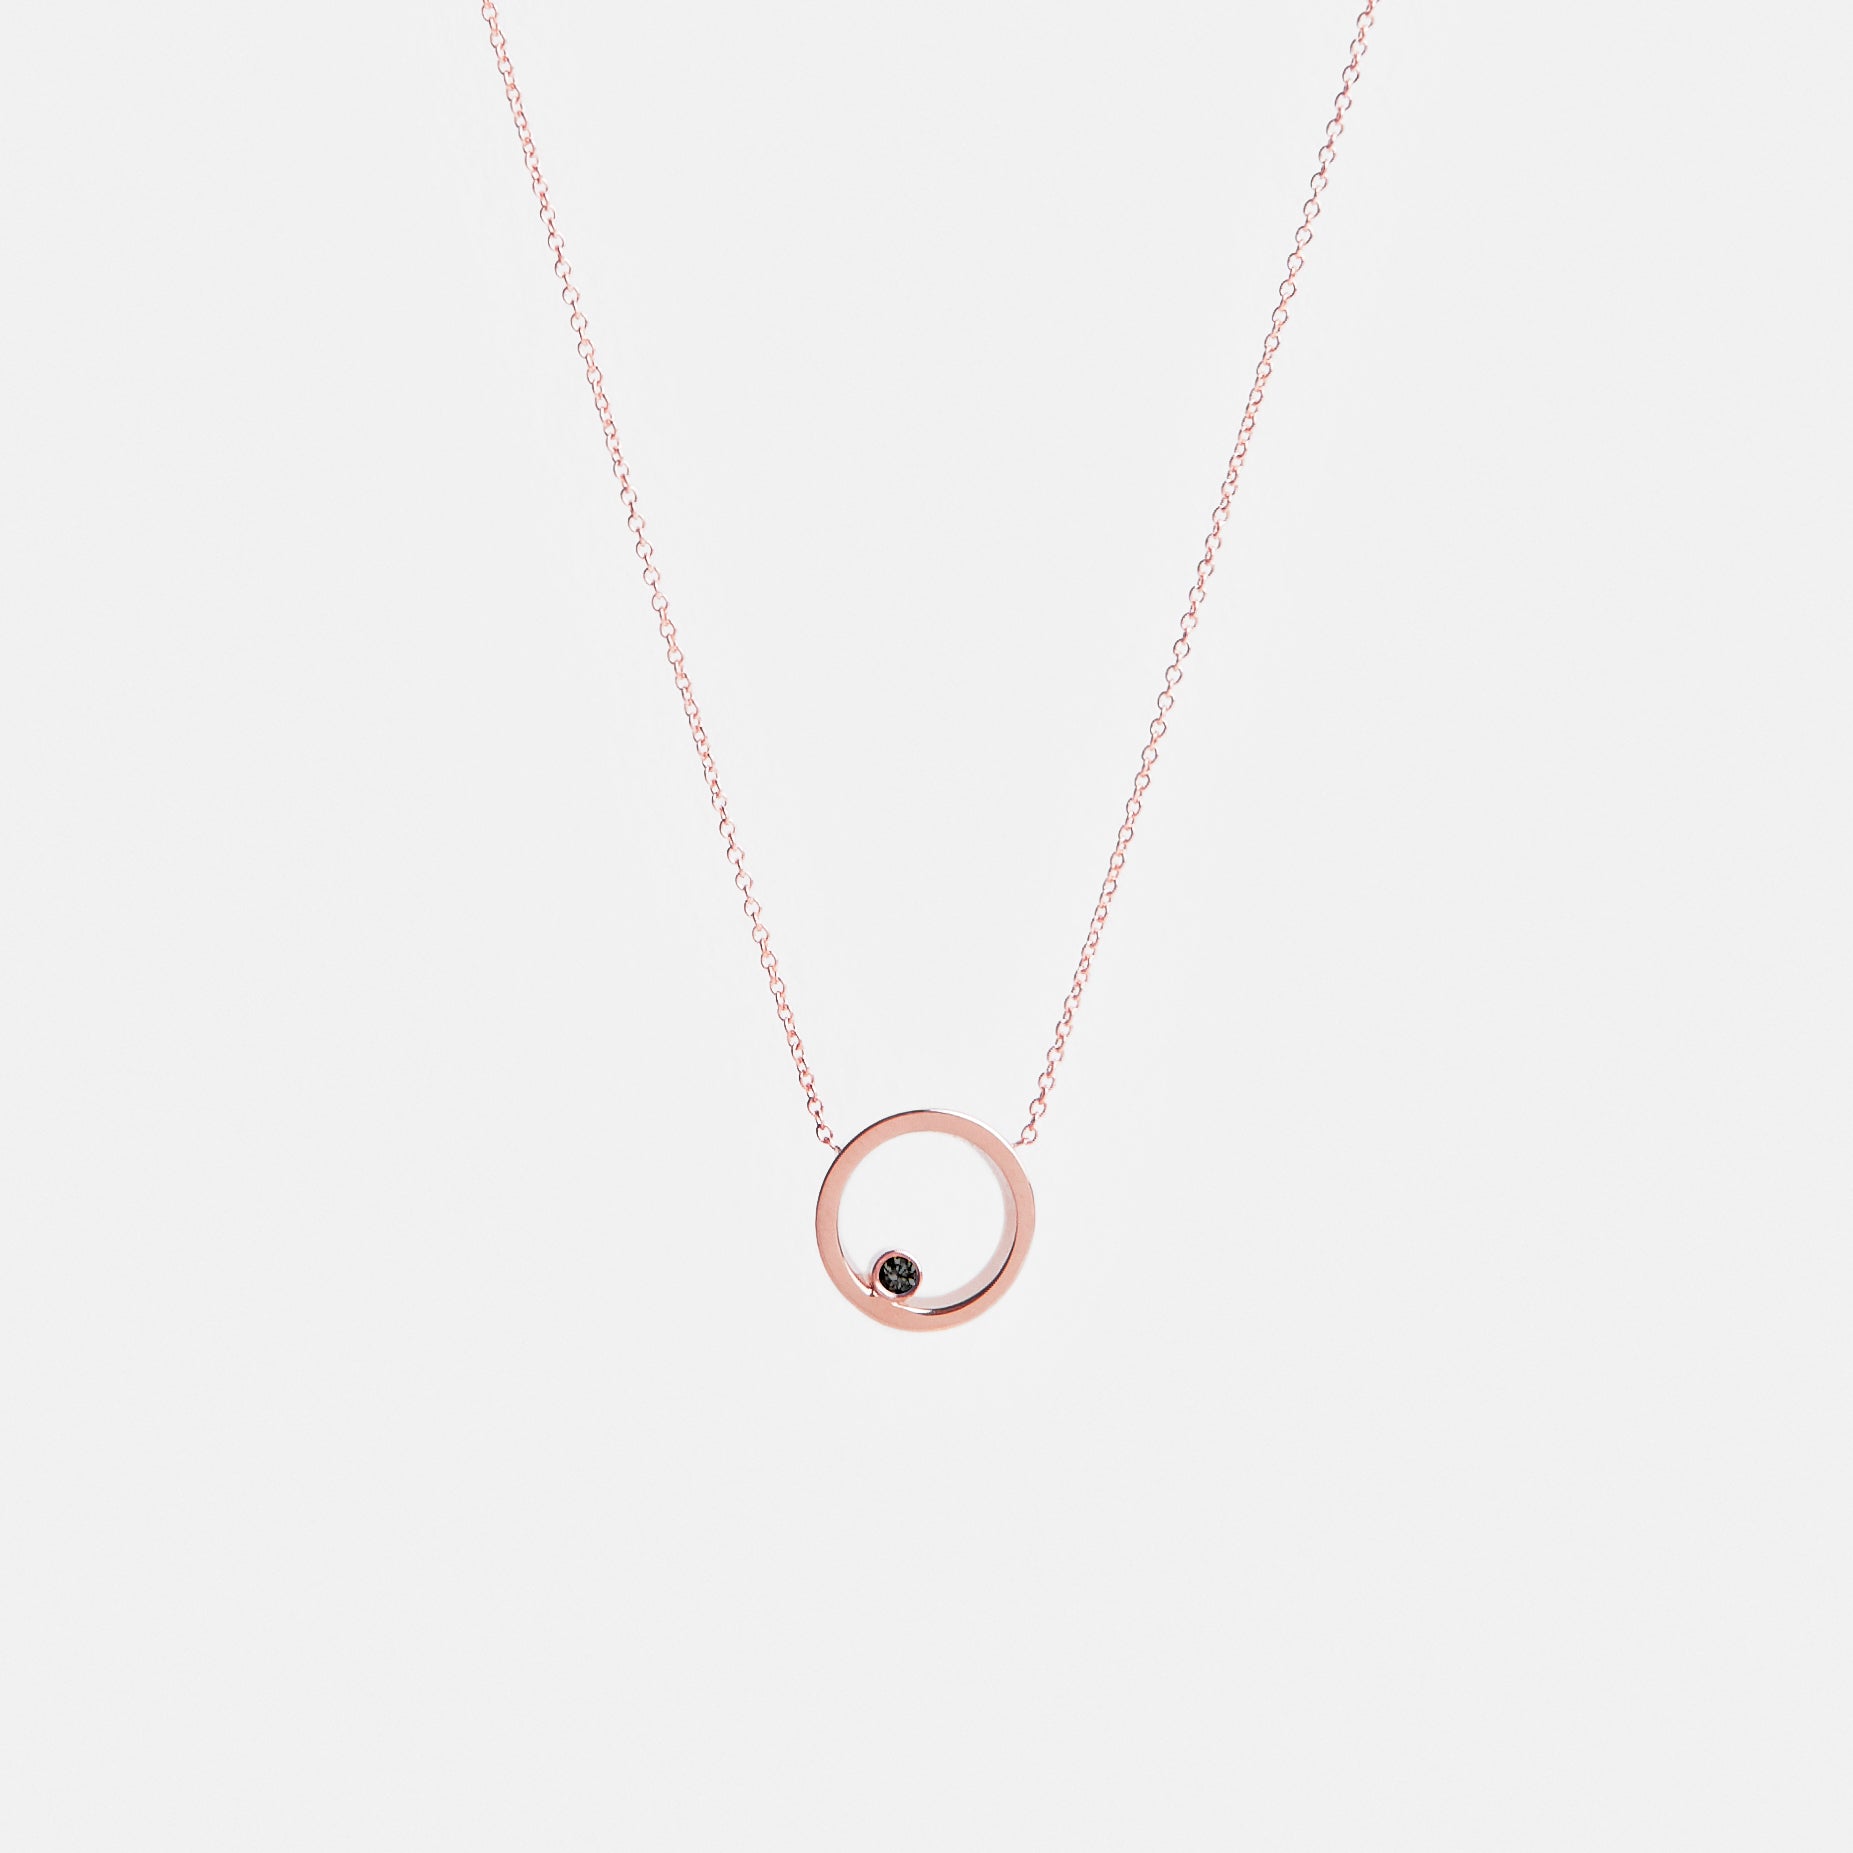 Ila Handmade Necklace in 14k Rose Gold set with Black Diamond By SHW Fine Jewelry NYC